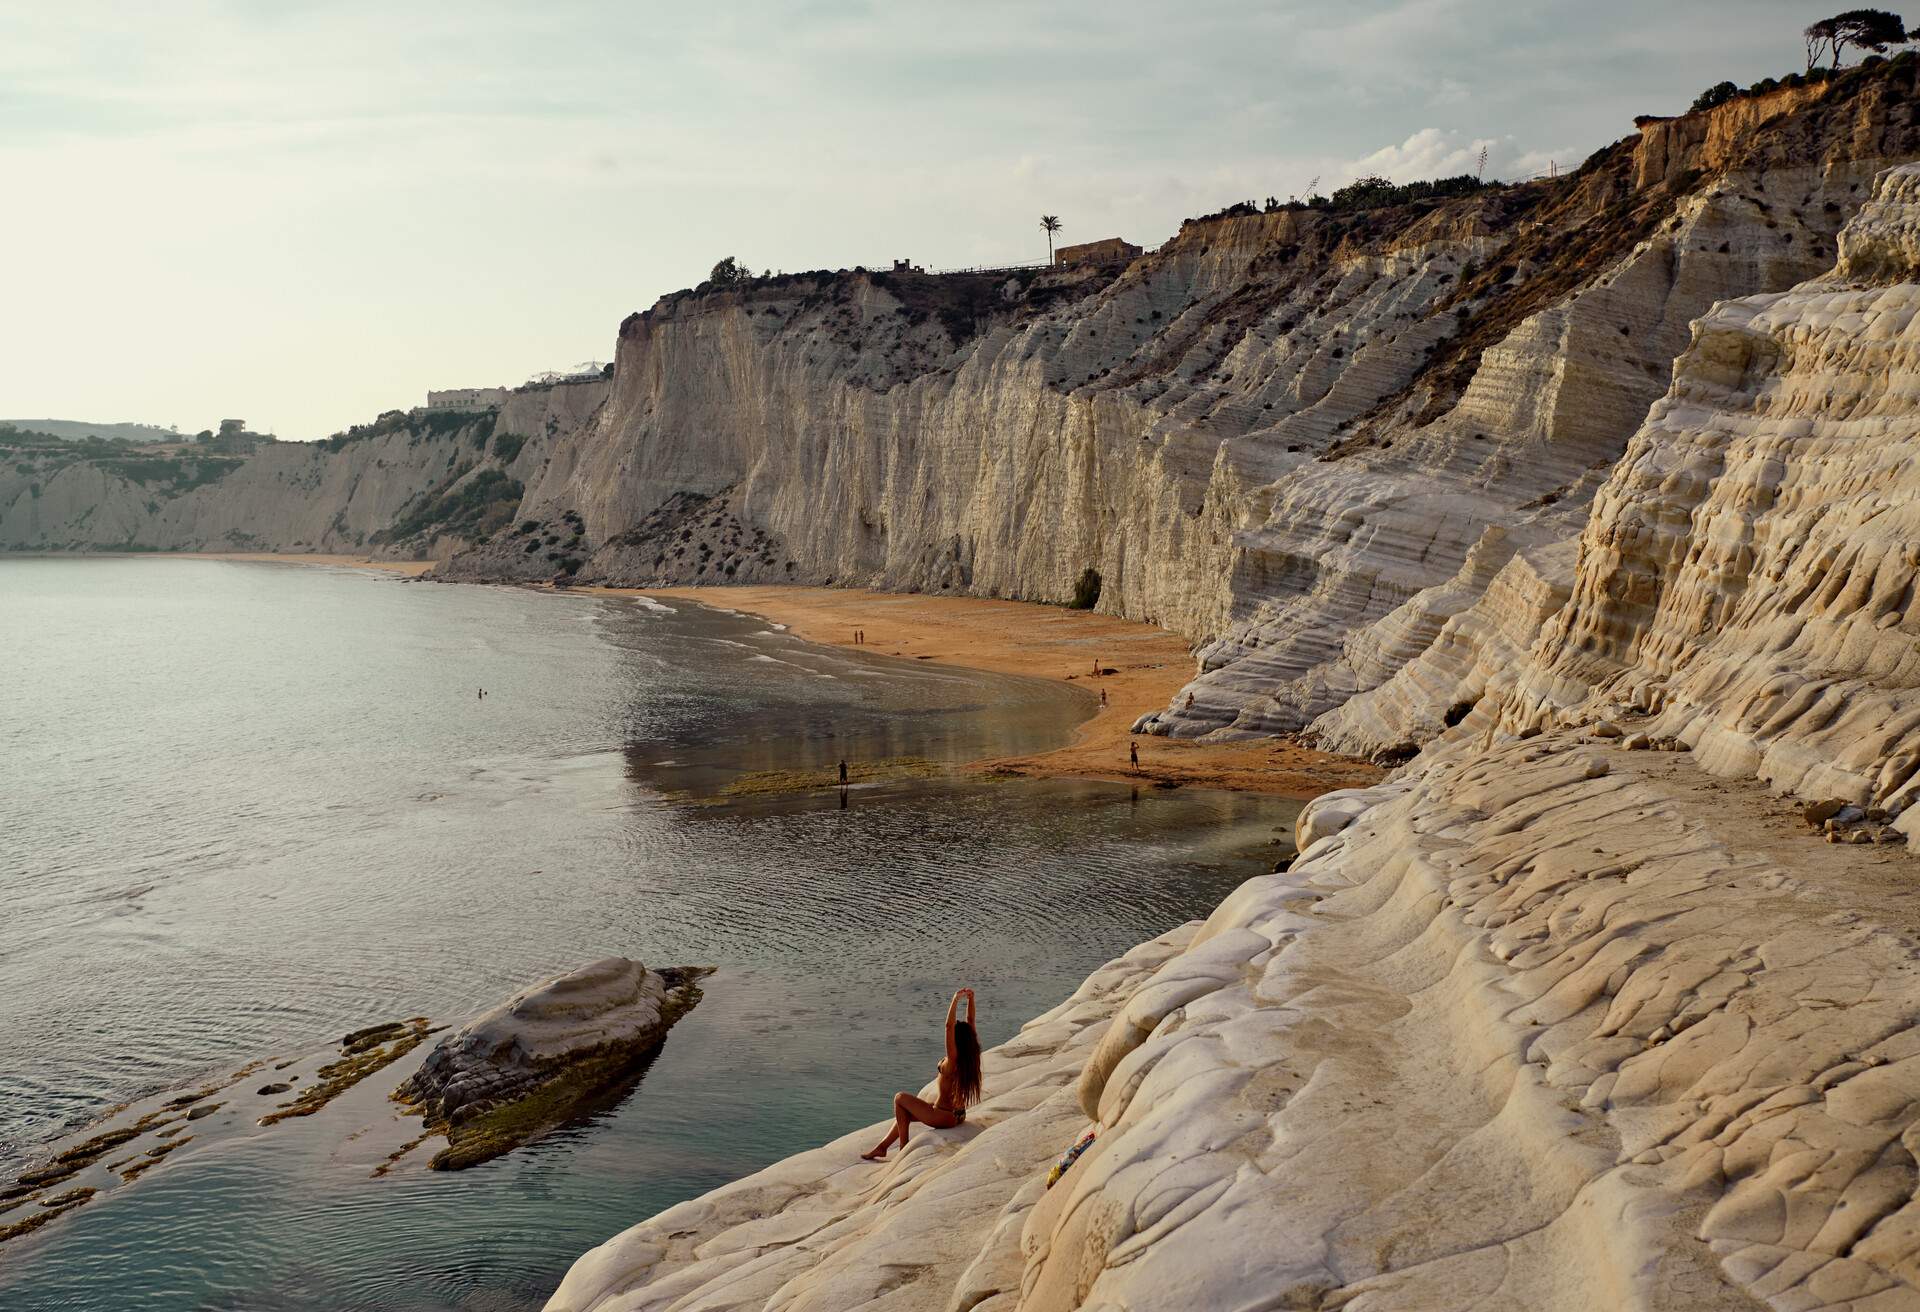 dest_italy_sicily_scala-dei-turchi_gettyimages-1139996342_checkfelix_within-usage-period_60314